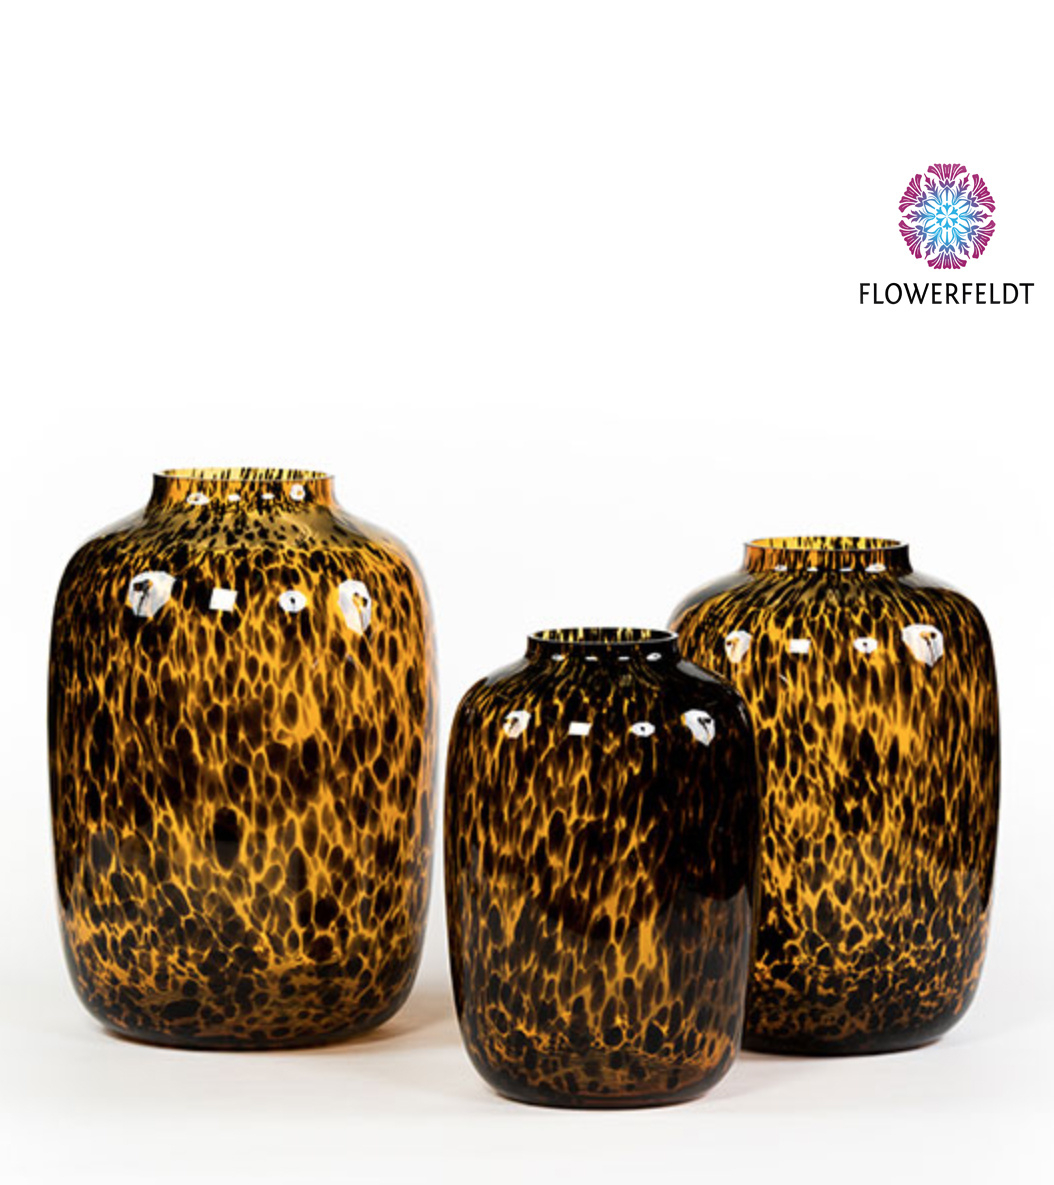 Vase Toronto Leppard Xl Vases And Pots Leppard Vase Of with dimensions 1054 X 1185